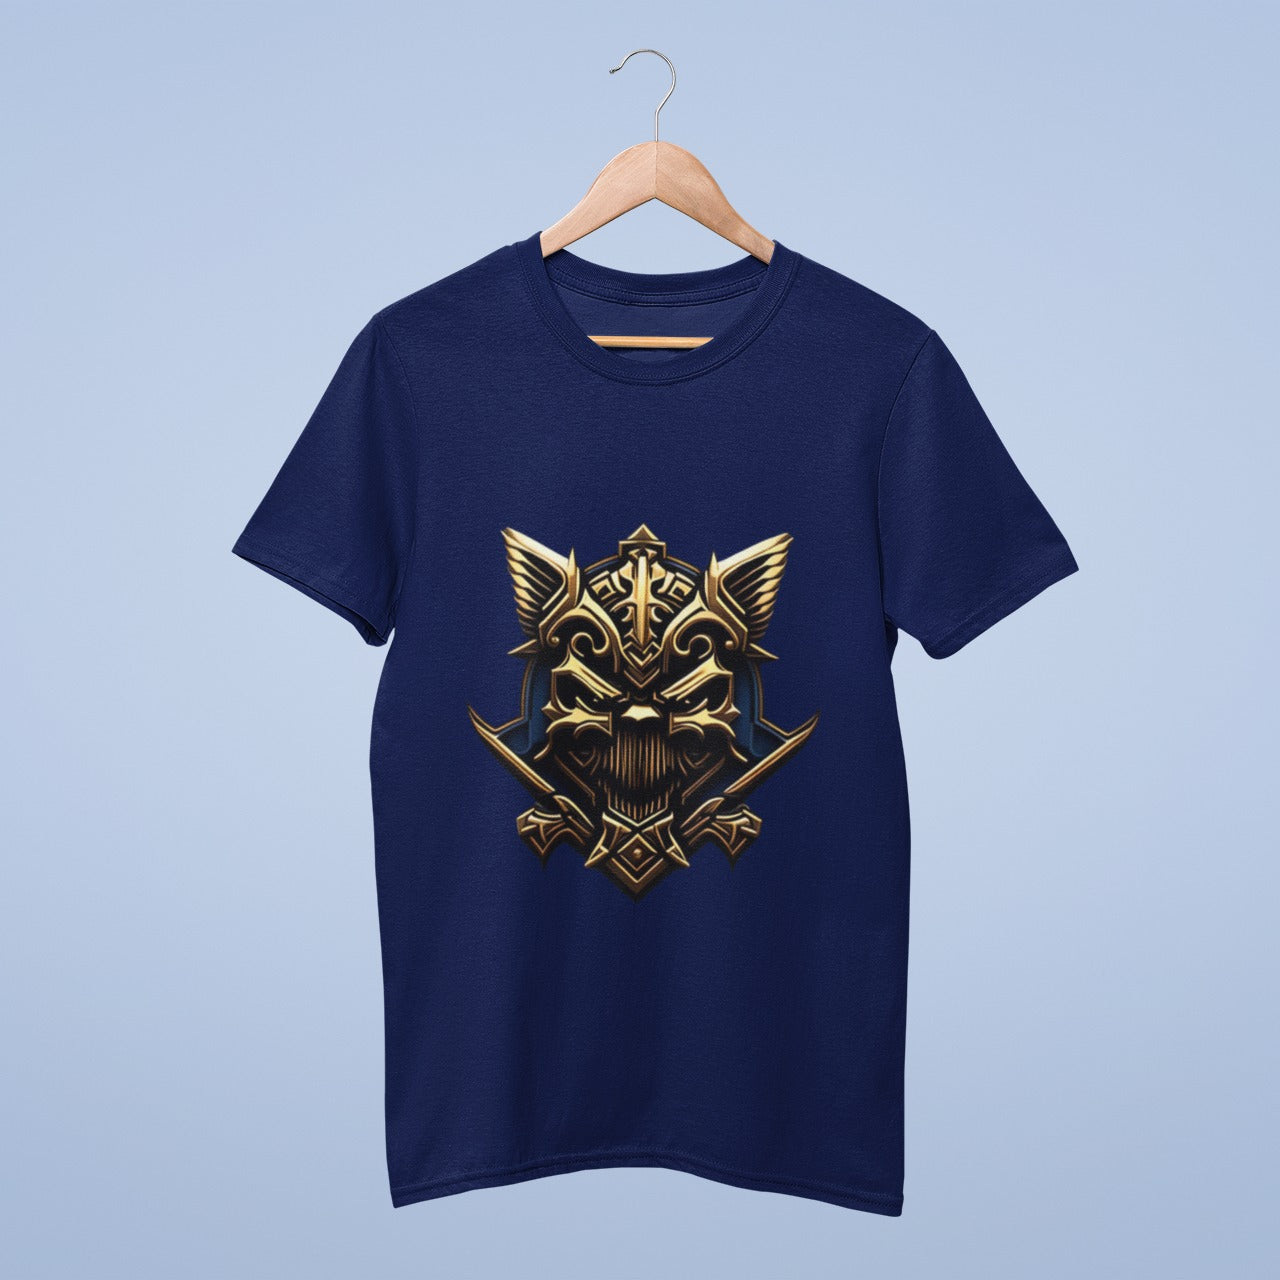 Gold evil head crest tee from @arkoroy99